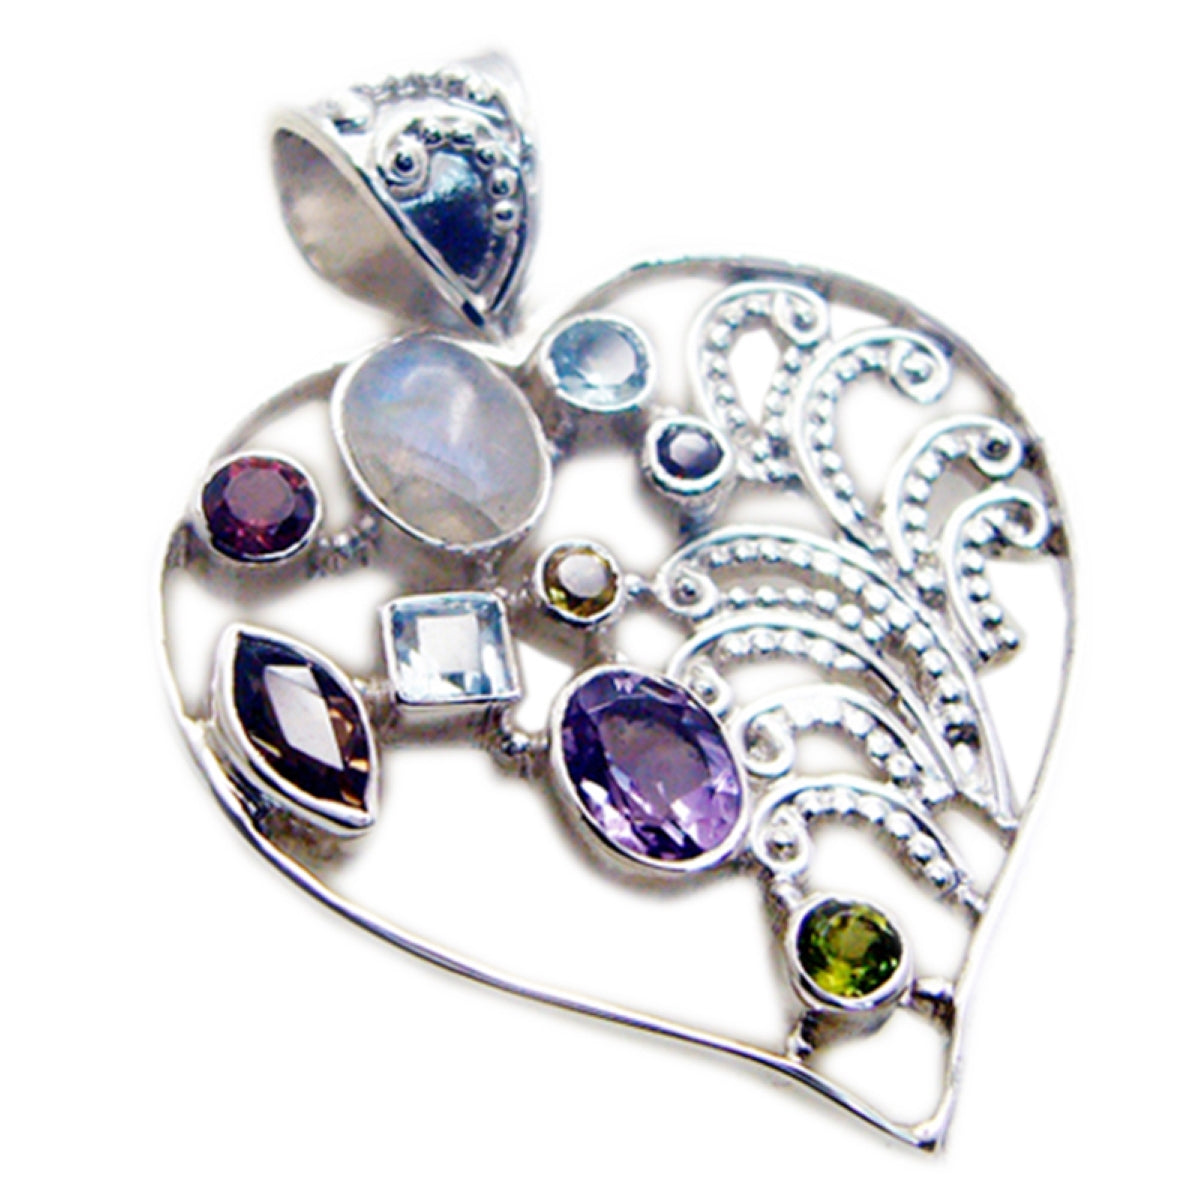 Riyo Good Gemstones Multi Shape Faceted Multi Color Multi Stone 925 Sterling Silver Pendant gift fordaughter day